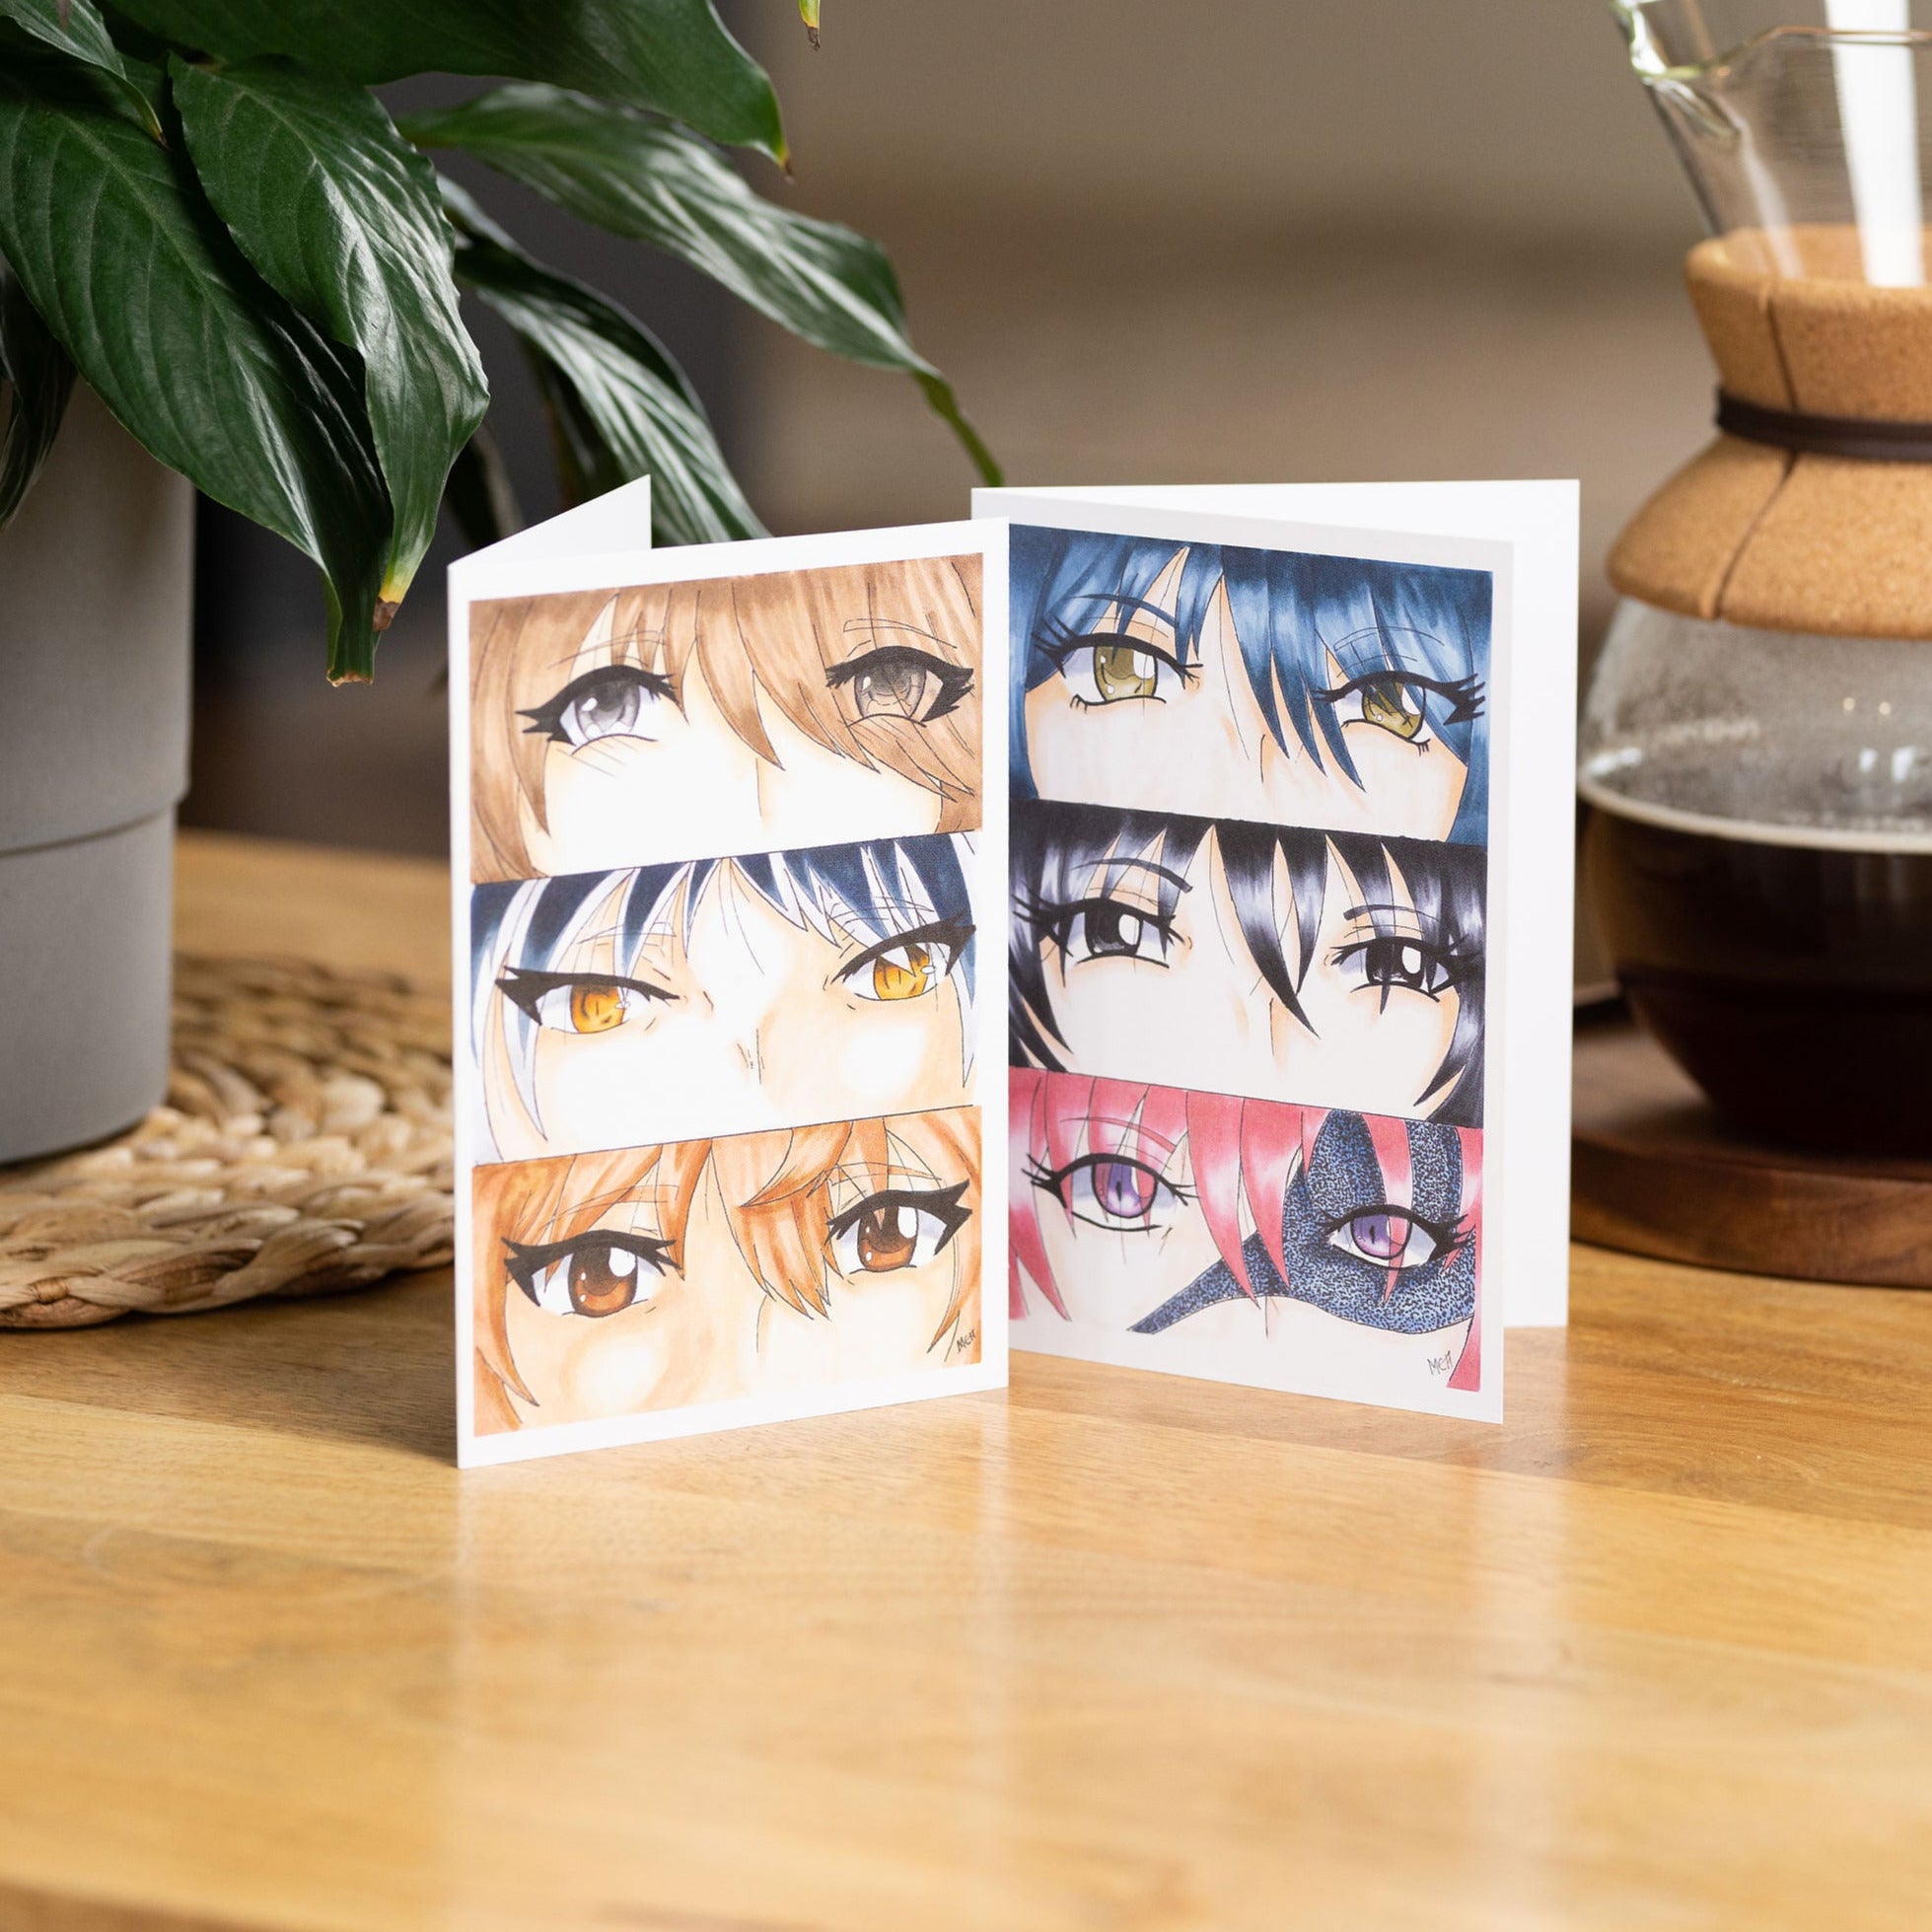 Girl's Eyes And Boy's Eyes A6 Greetings Cards On A Wooden Table With A Pot Of Coffee And A Potted Plant